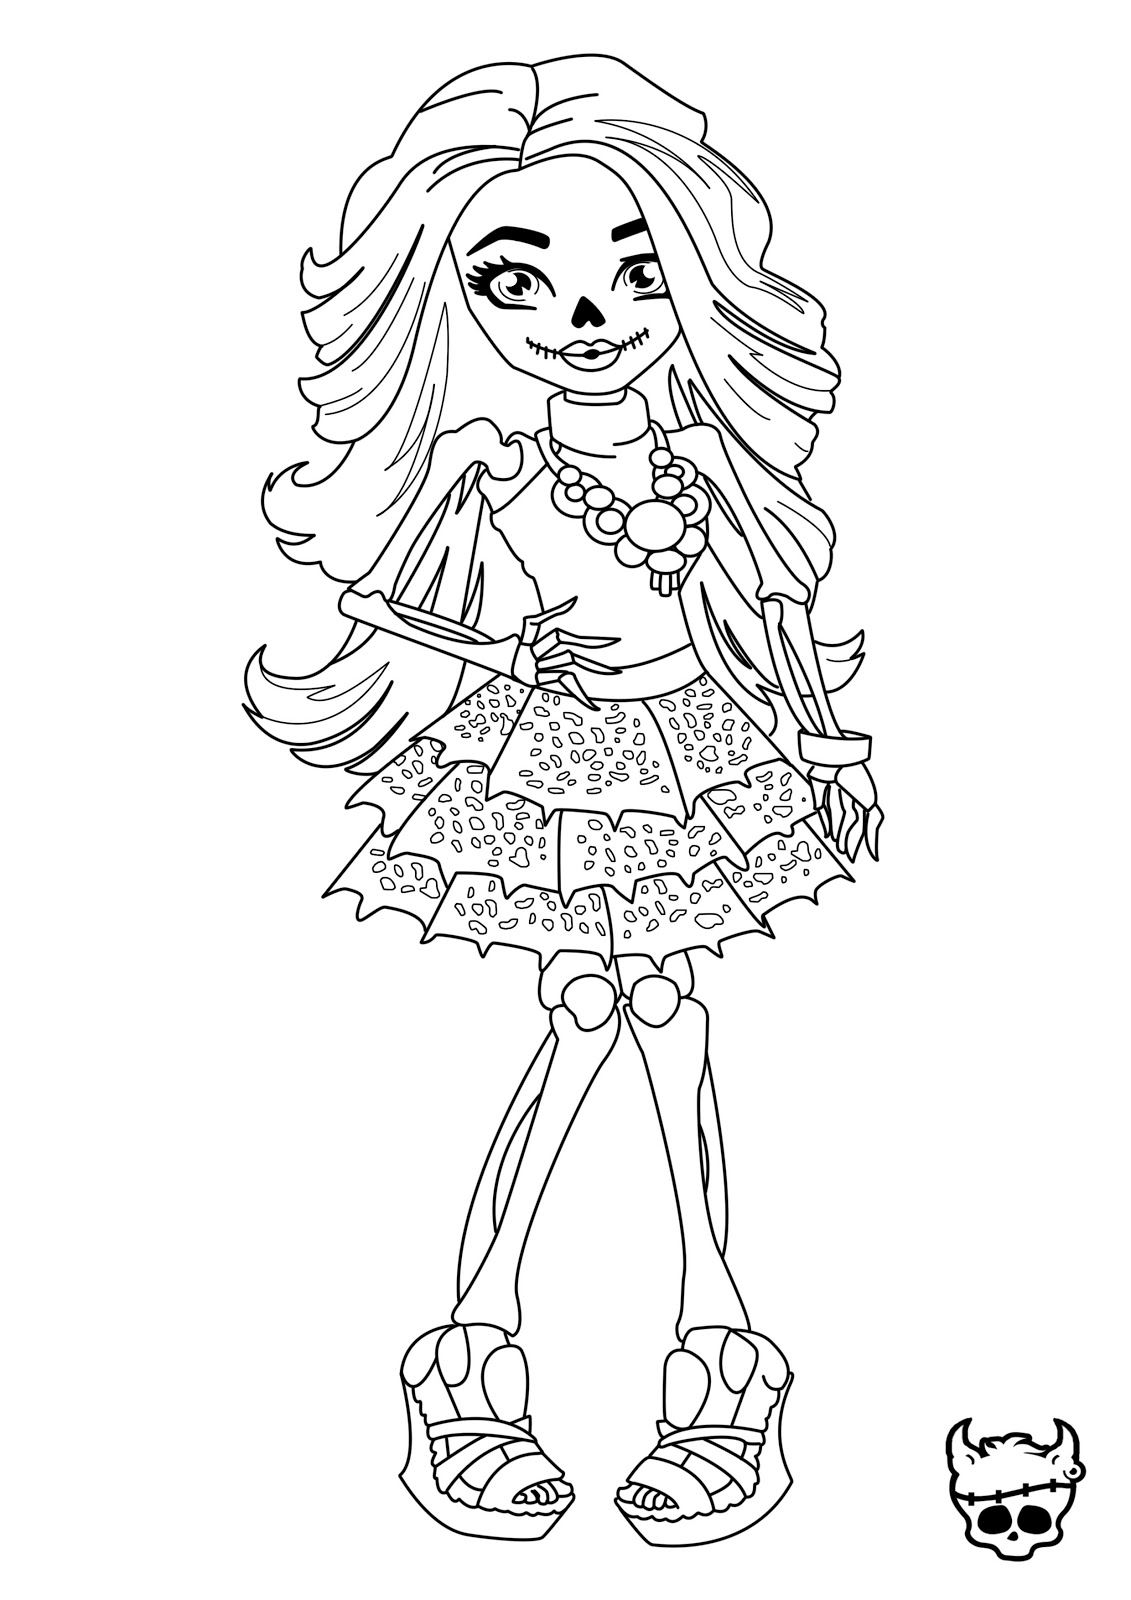  Monster High Coloring Pages | #4